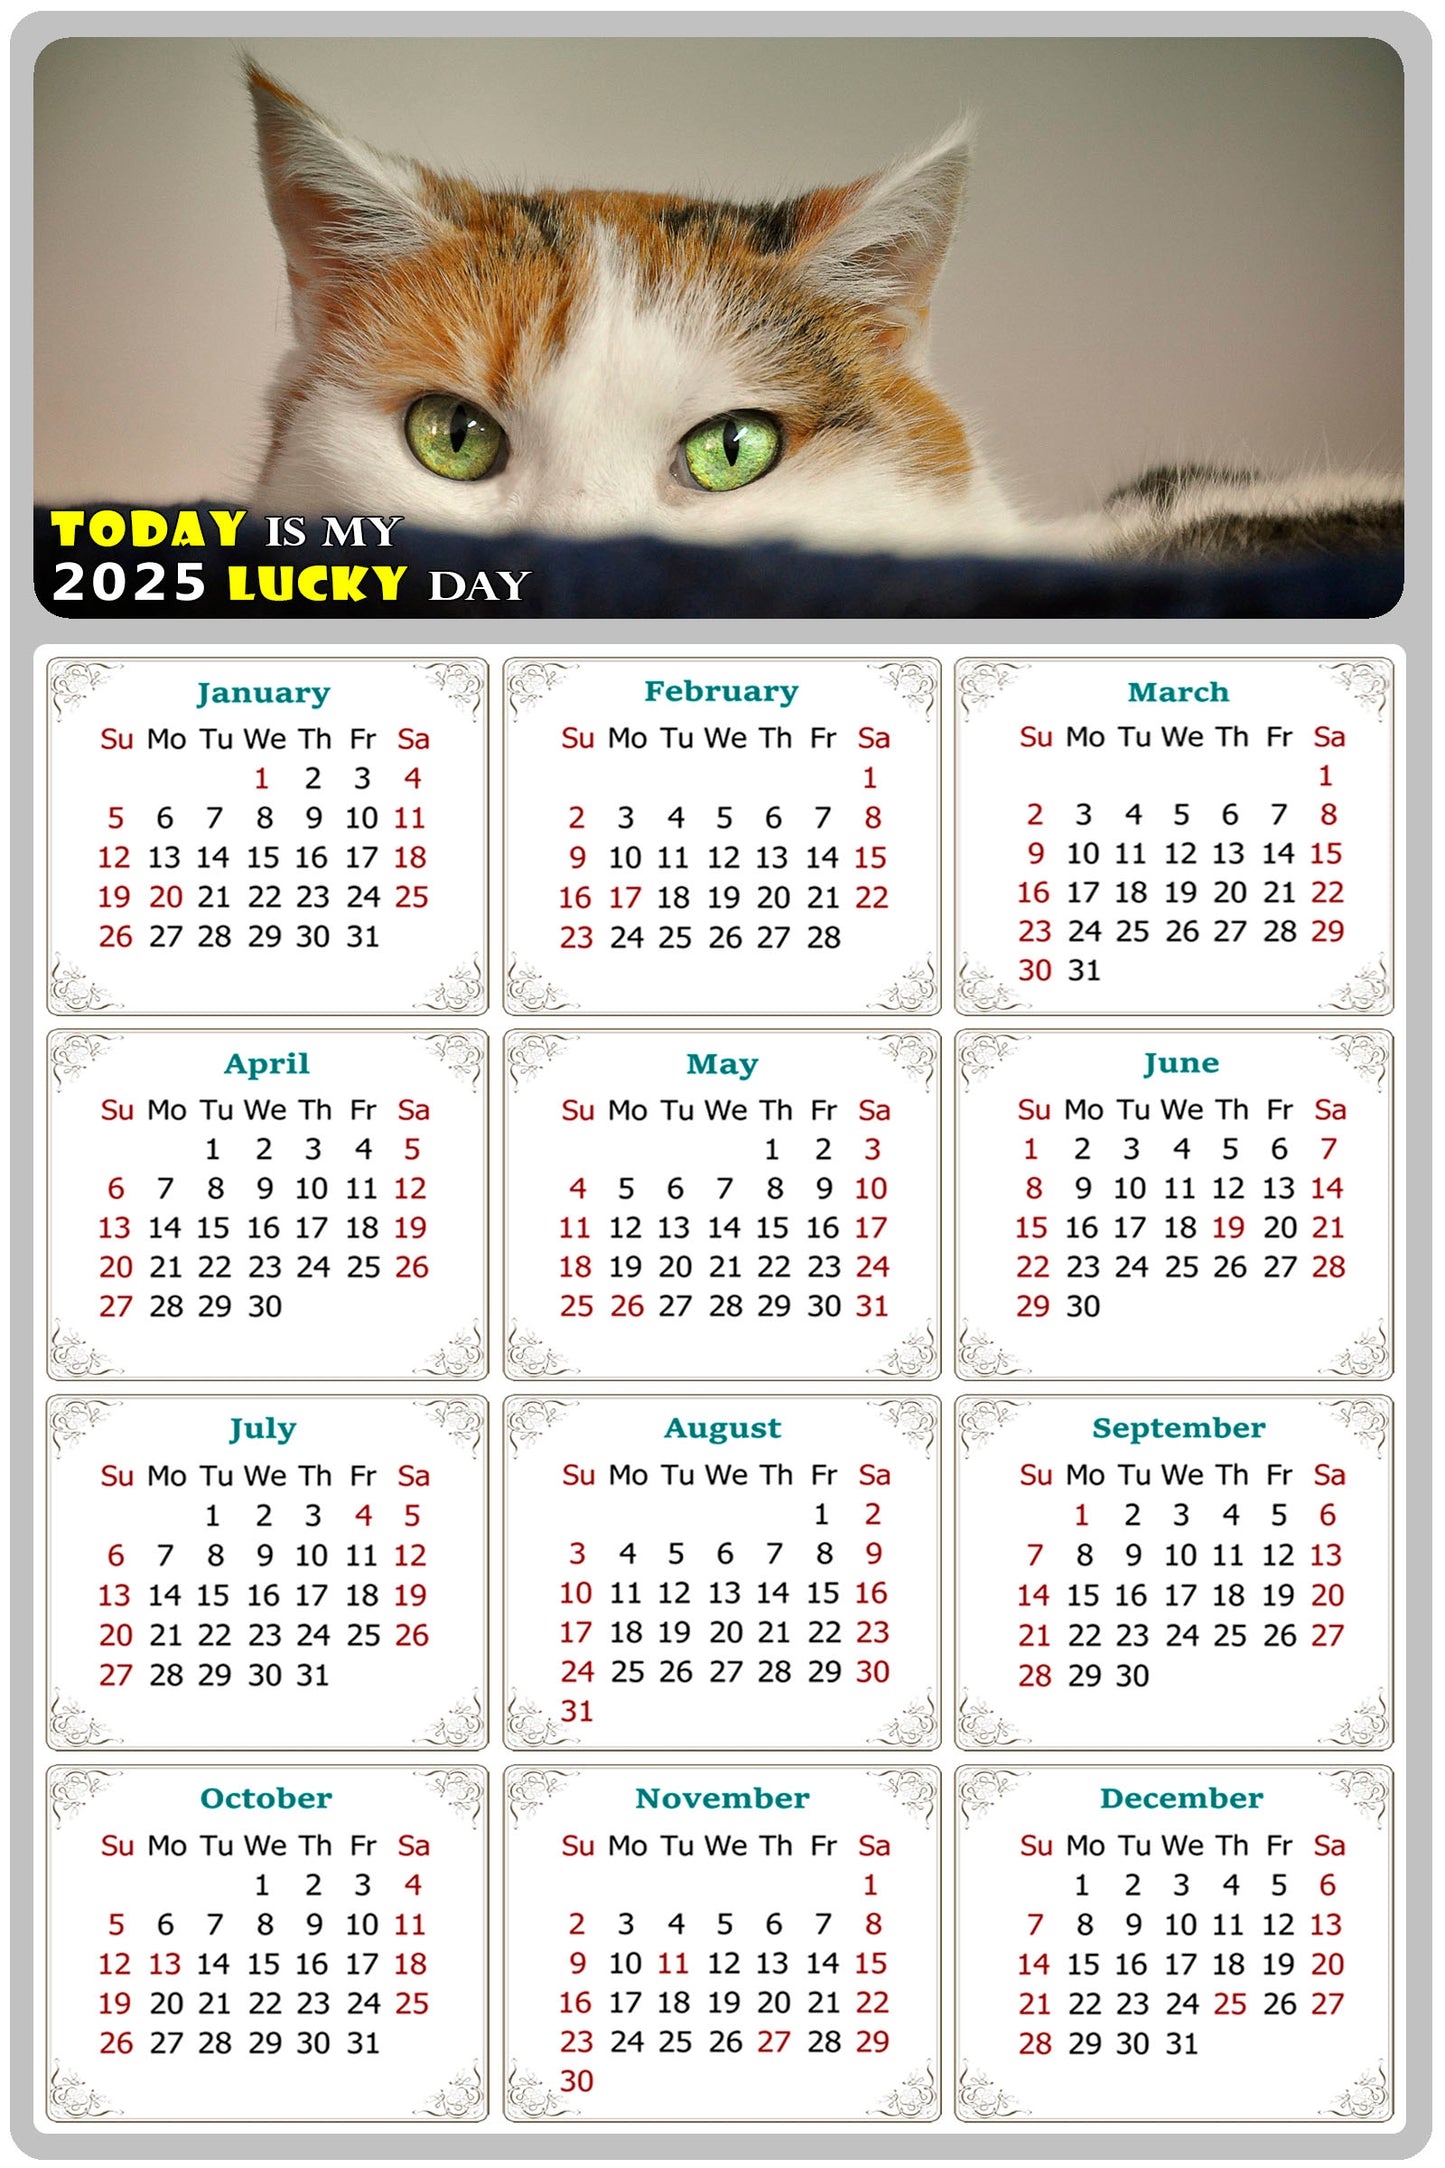 2025 Magnetic Calendar - Today is My Lucky Day (Fade, Tear, and Water Resistant)- Cat Themed 012